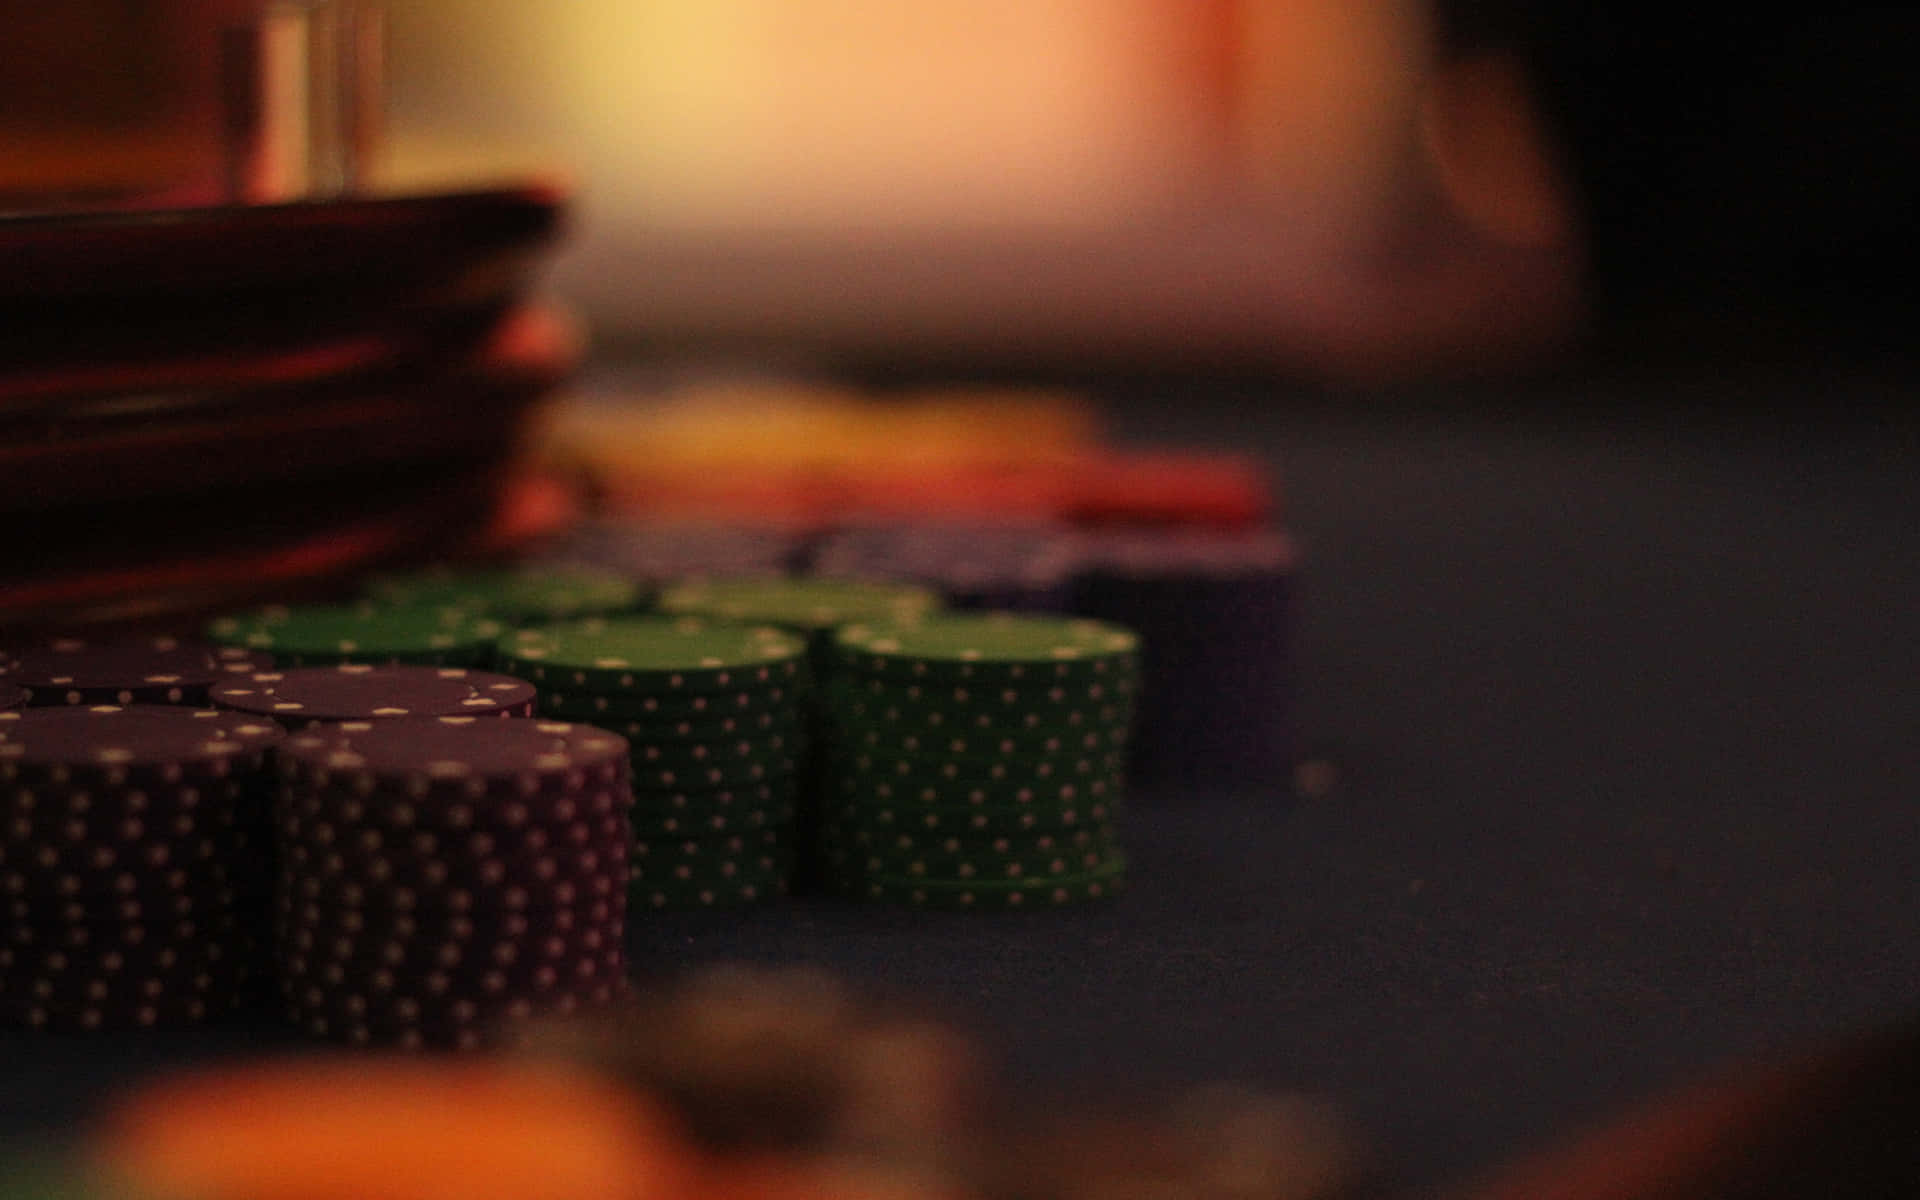 Get ready to ante up and challenge your poker skills